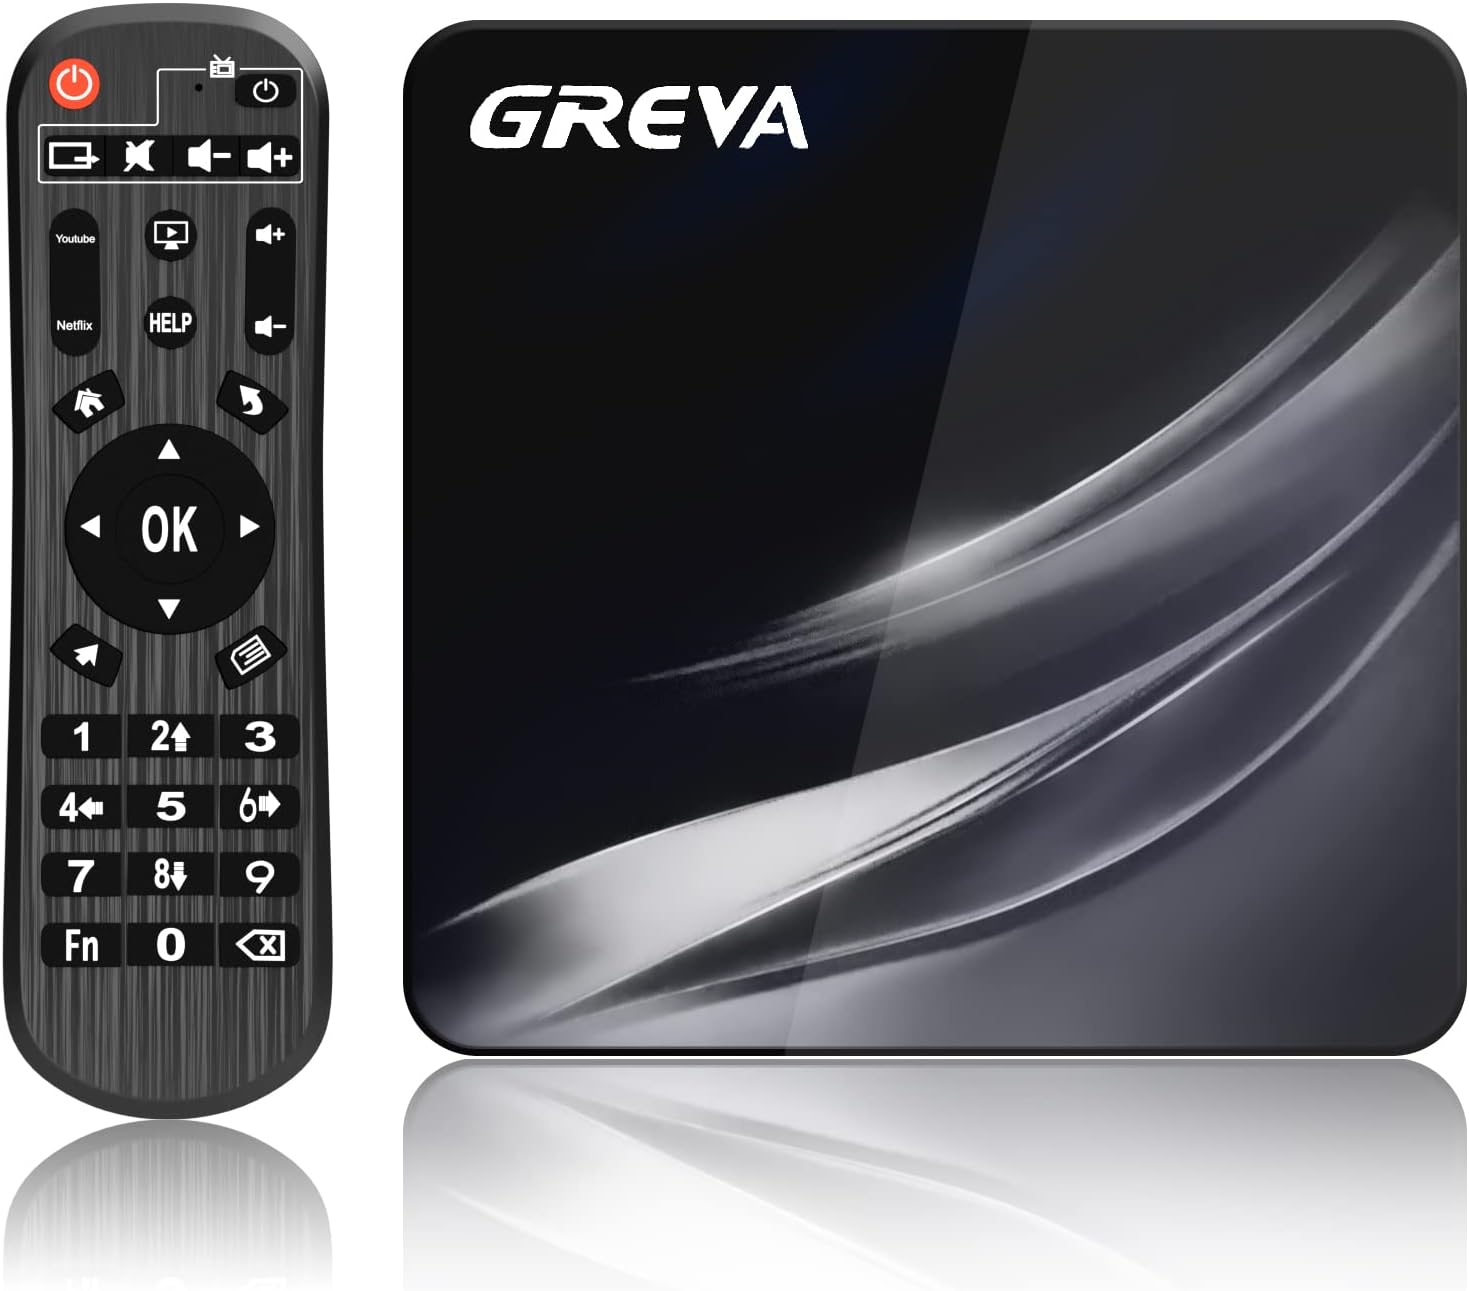 GREVA Android TV Box 4K, Android Box 11.0 with 4GB RAM 64GB ROM Amlogic S905W2 WiFi 2.4G/5G 10/100M LAN Enternet Bluetooth 4.2 TV Box with Remote Control